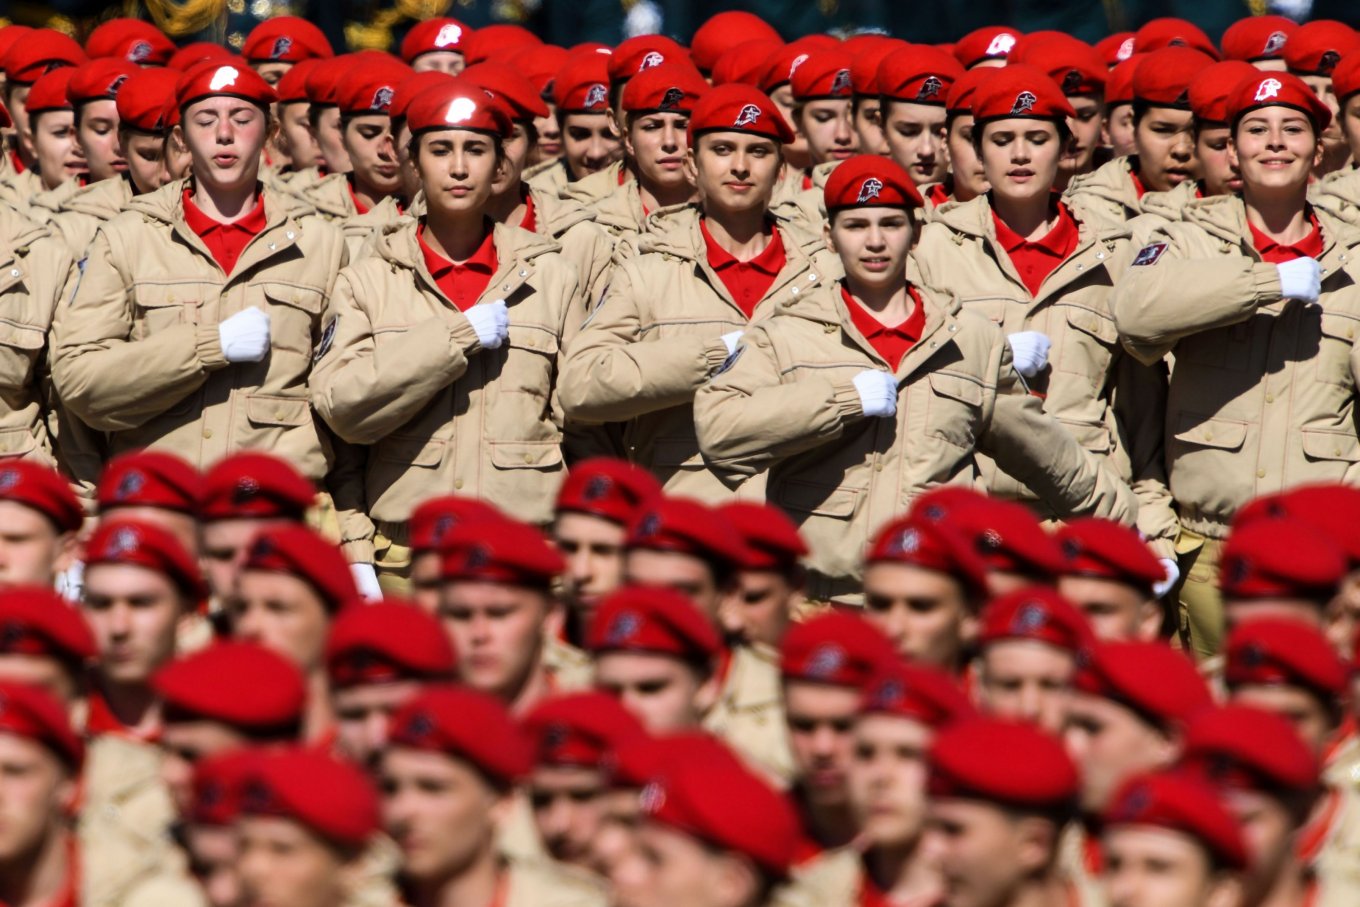 Russia's military-patriotic movement Yunarmiya cadets march at Red Square during a rehearsal for the Victory Day military parade in Moscow, Russia Militarizes Its Secondary Schools Returning Military Training For Schoolchildren, Defense Express